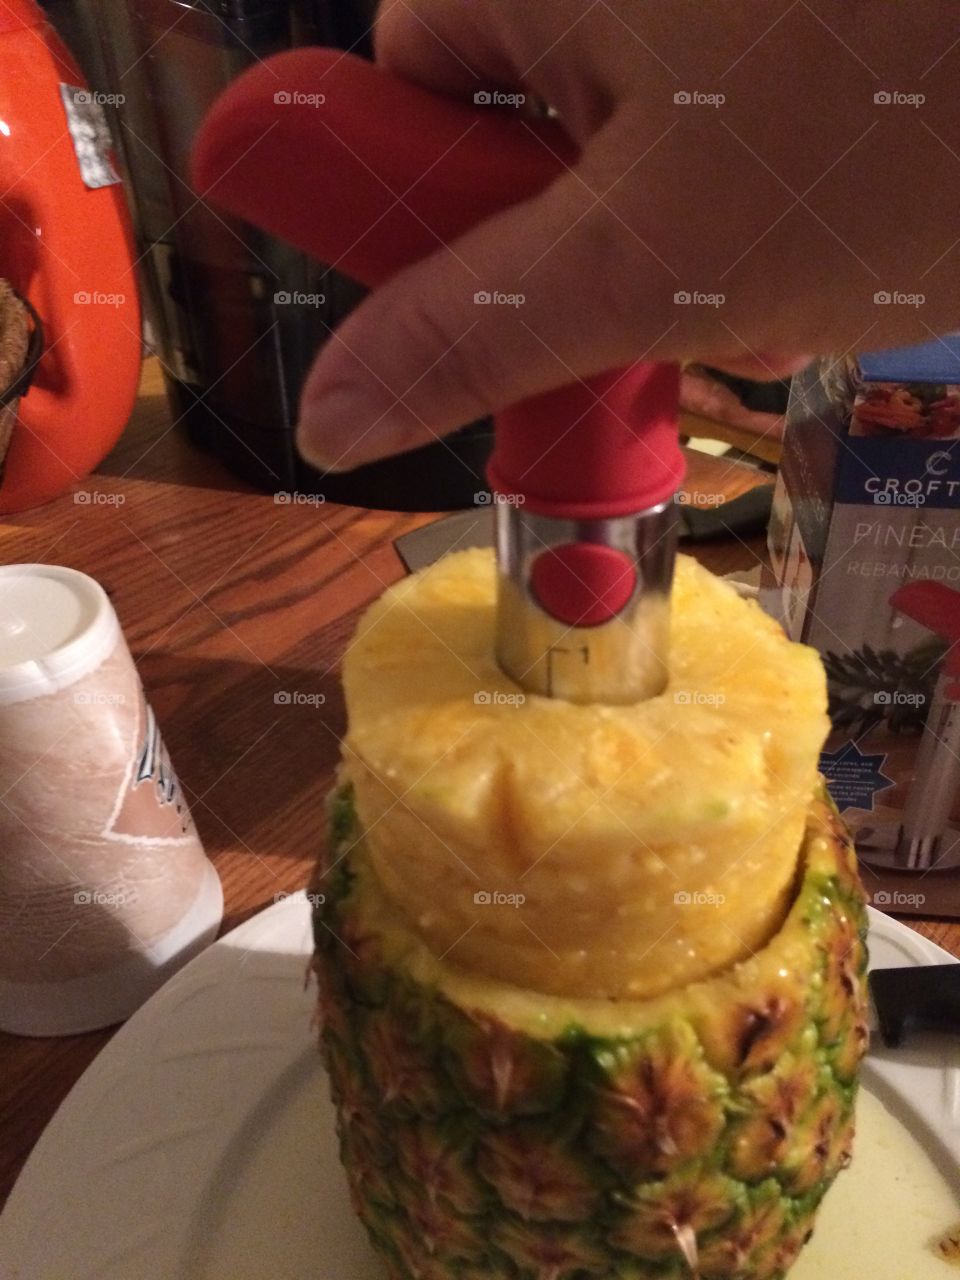 The best way to slice a pineapple ever!!